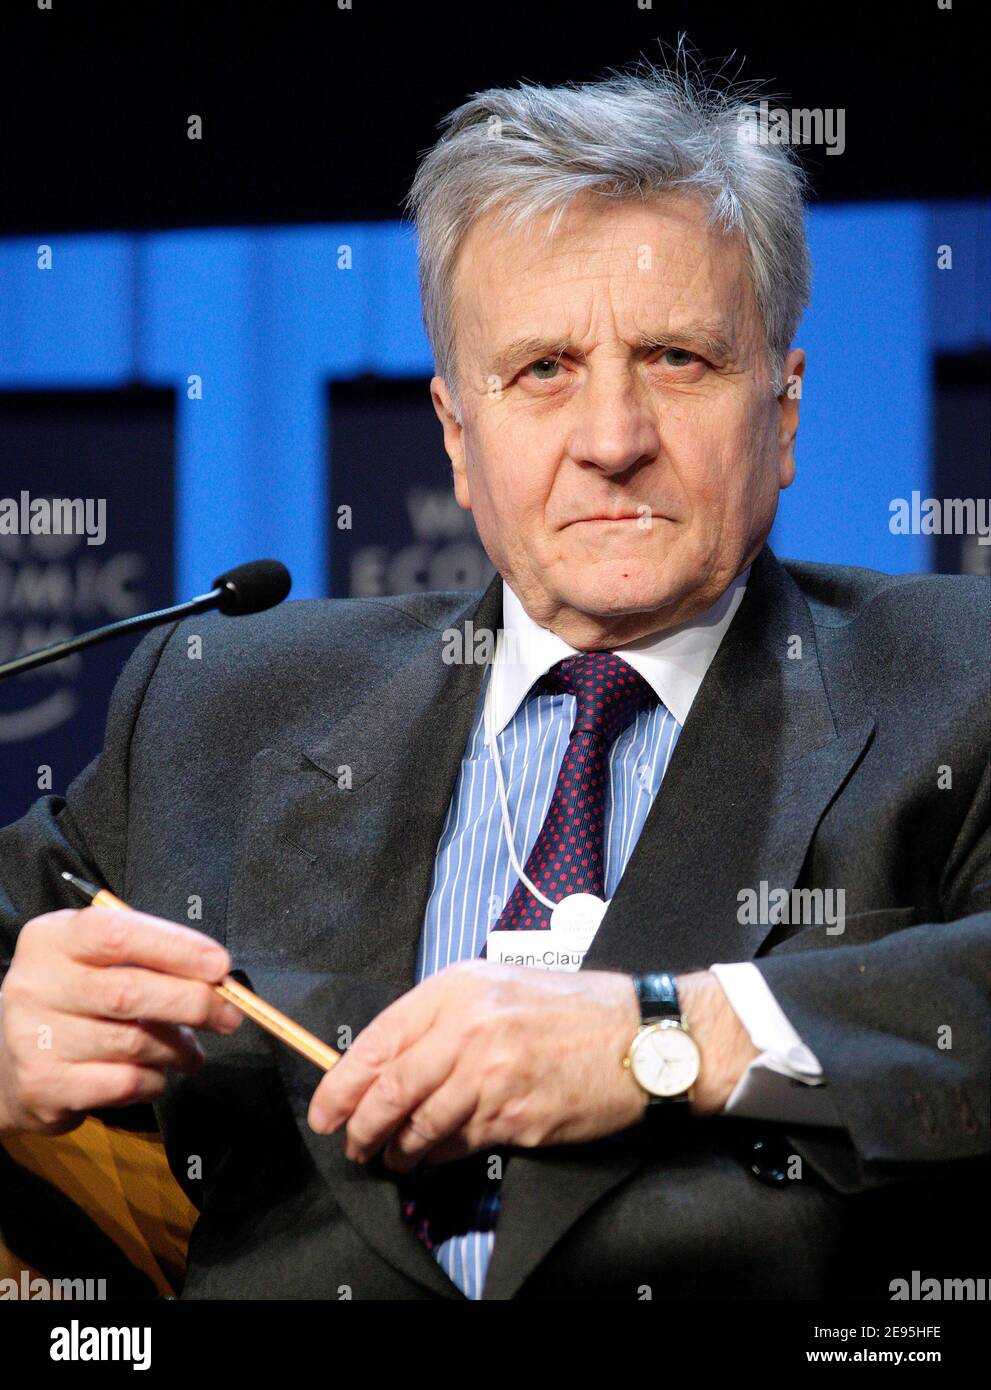 Jean-Claude Trichet, President, European Central Bank, Frankfurt, captured  during the session 'Finding Balance in the Global Economy' at the Annual  Meeting 2006 of the World Economic Forum in Davos, Switzerland, January 28,